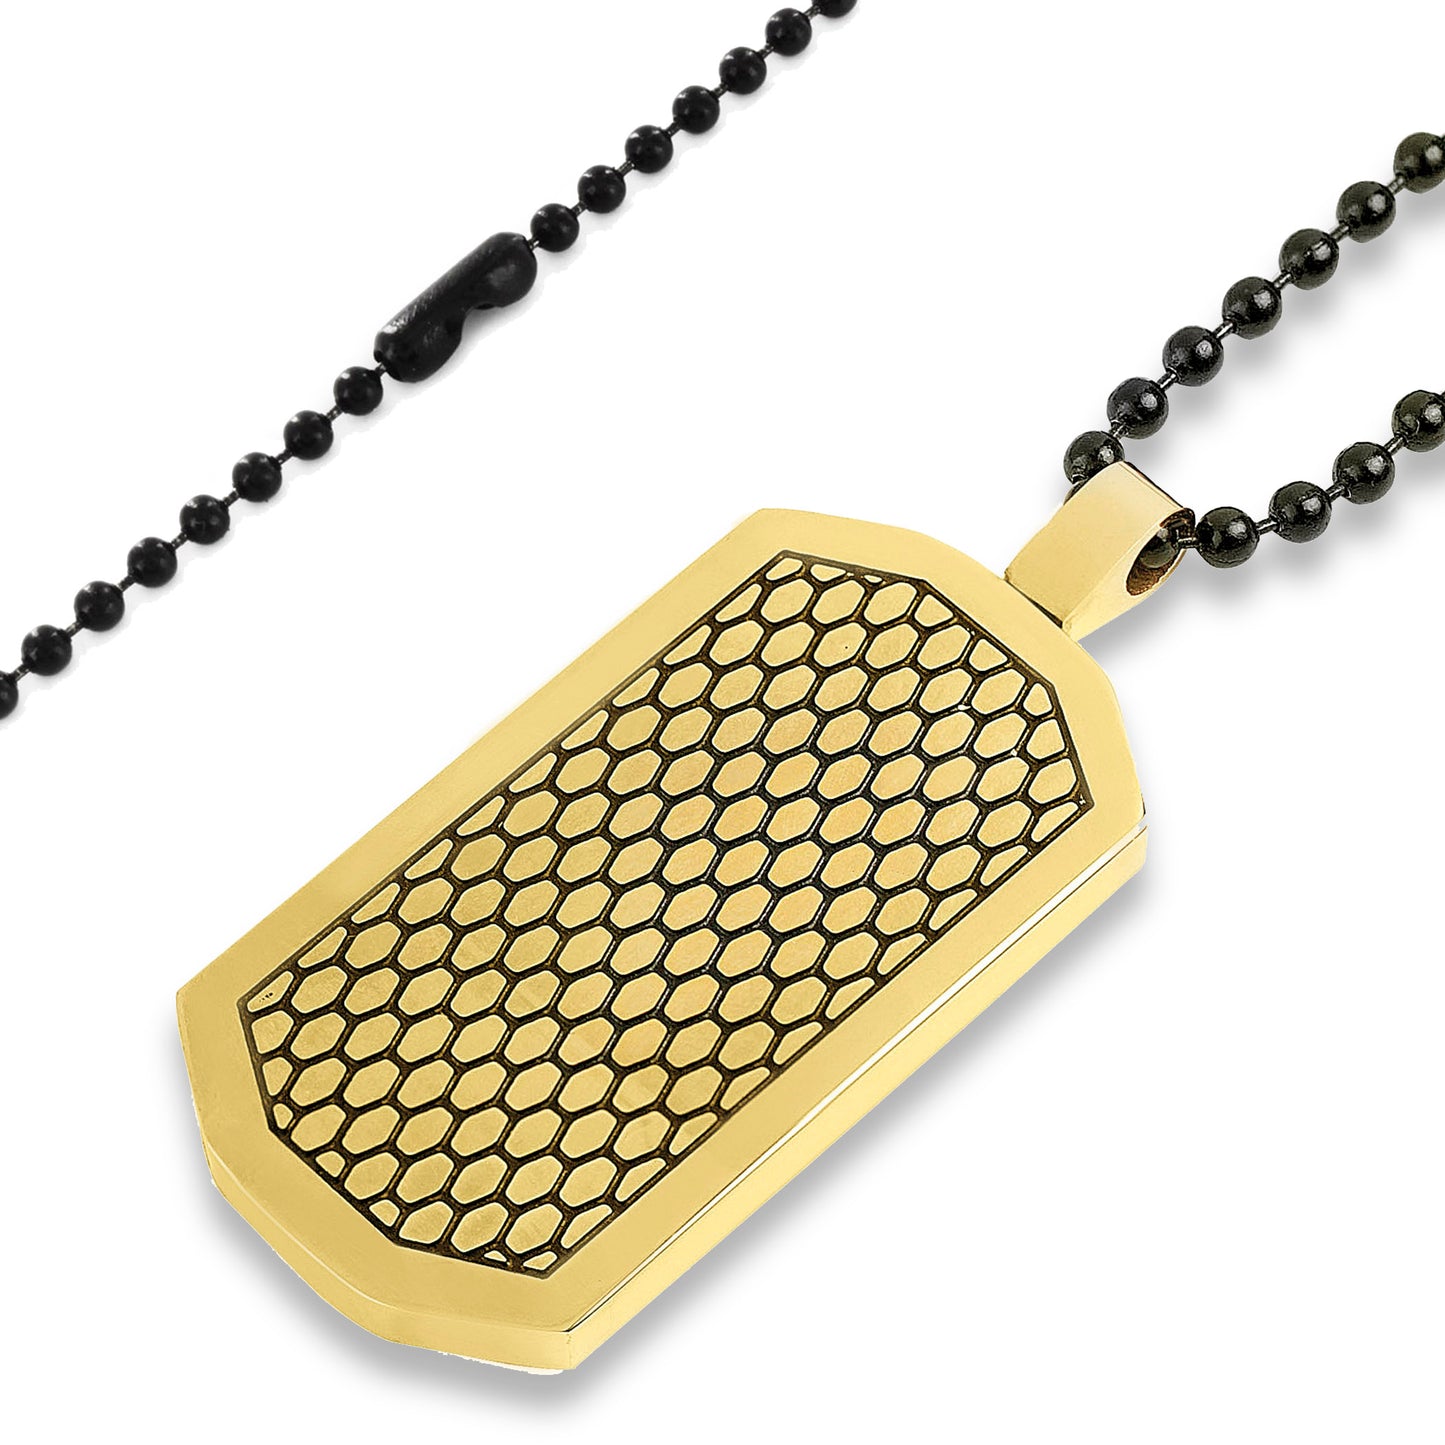 Men's Gold Plated Two-Tone Stainless Steel Honeycomb Texture Dog Tag Pendant Necklace - 24"